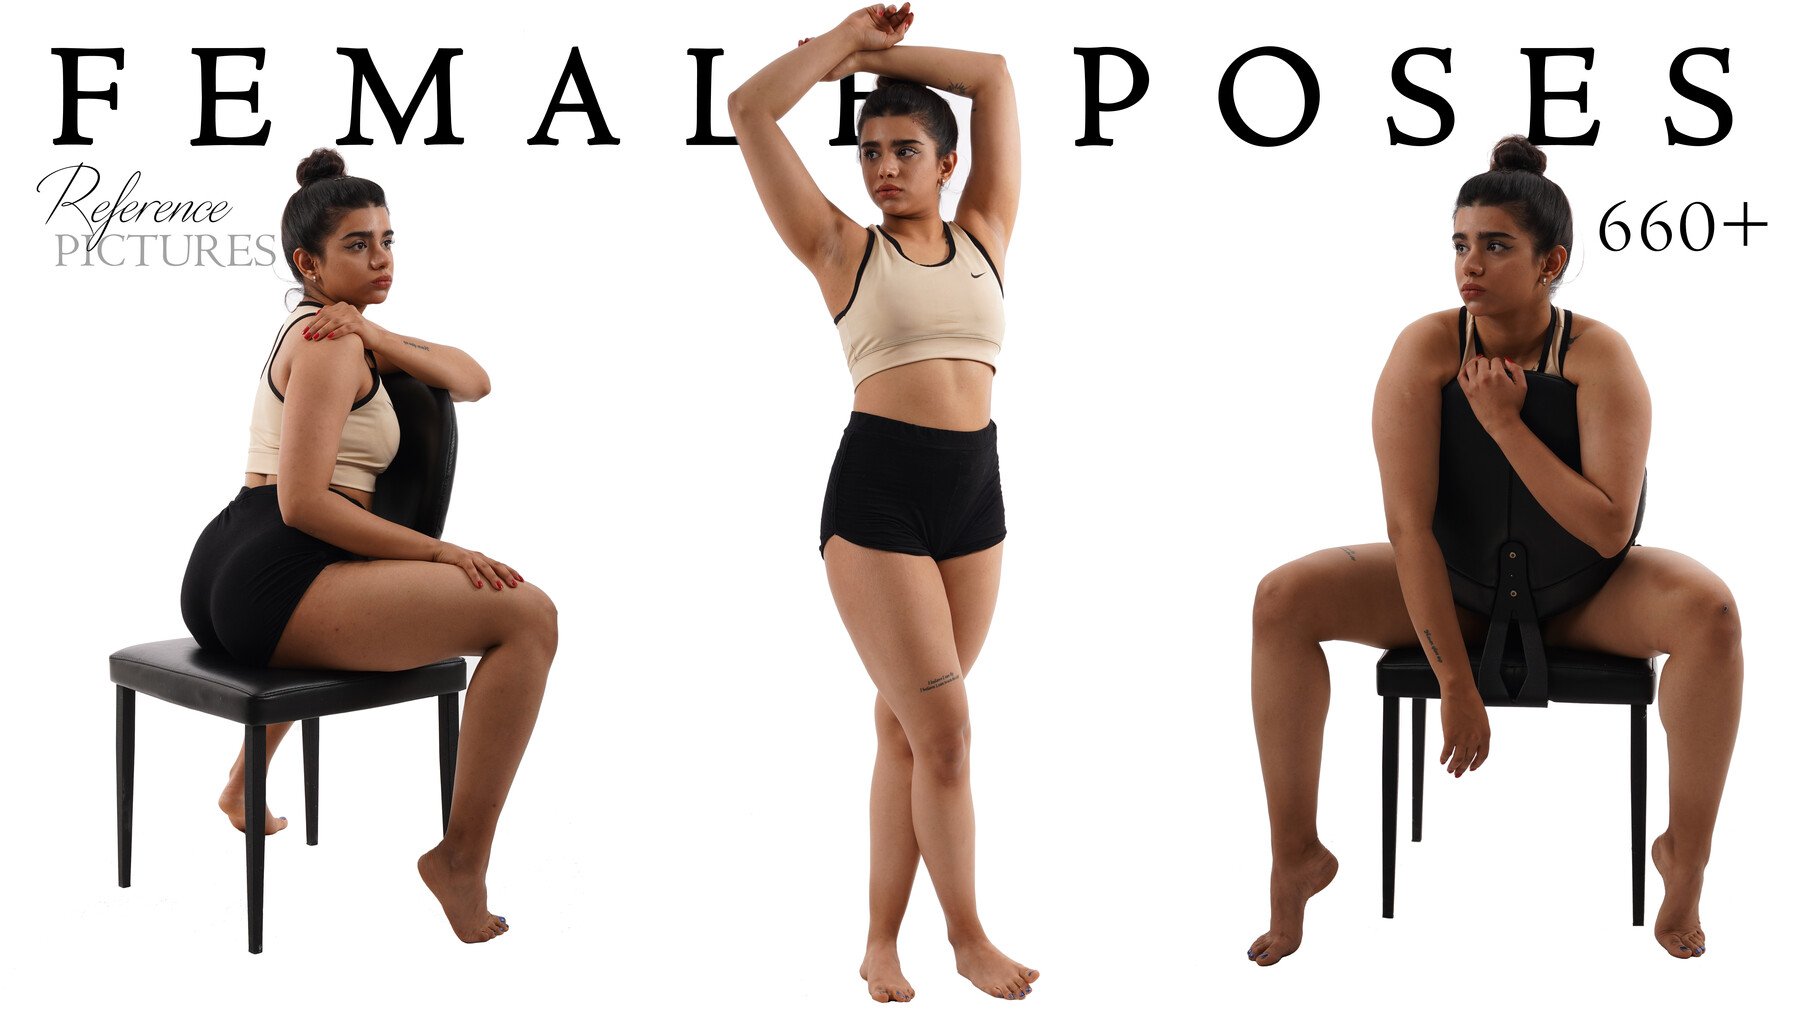 Drawn Female Pose Reference Cards by Nicholas Franda » First Set Of Digital  Downloads Are Ready!!! — Kickstarter